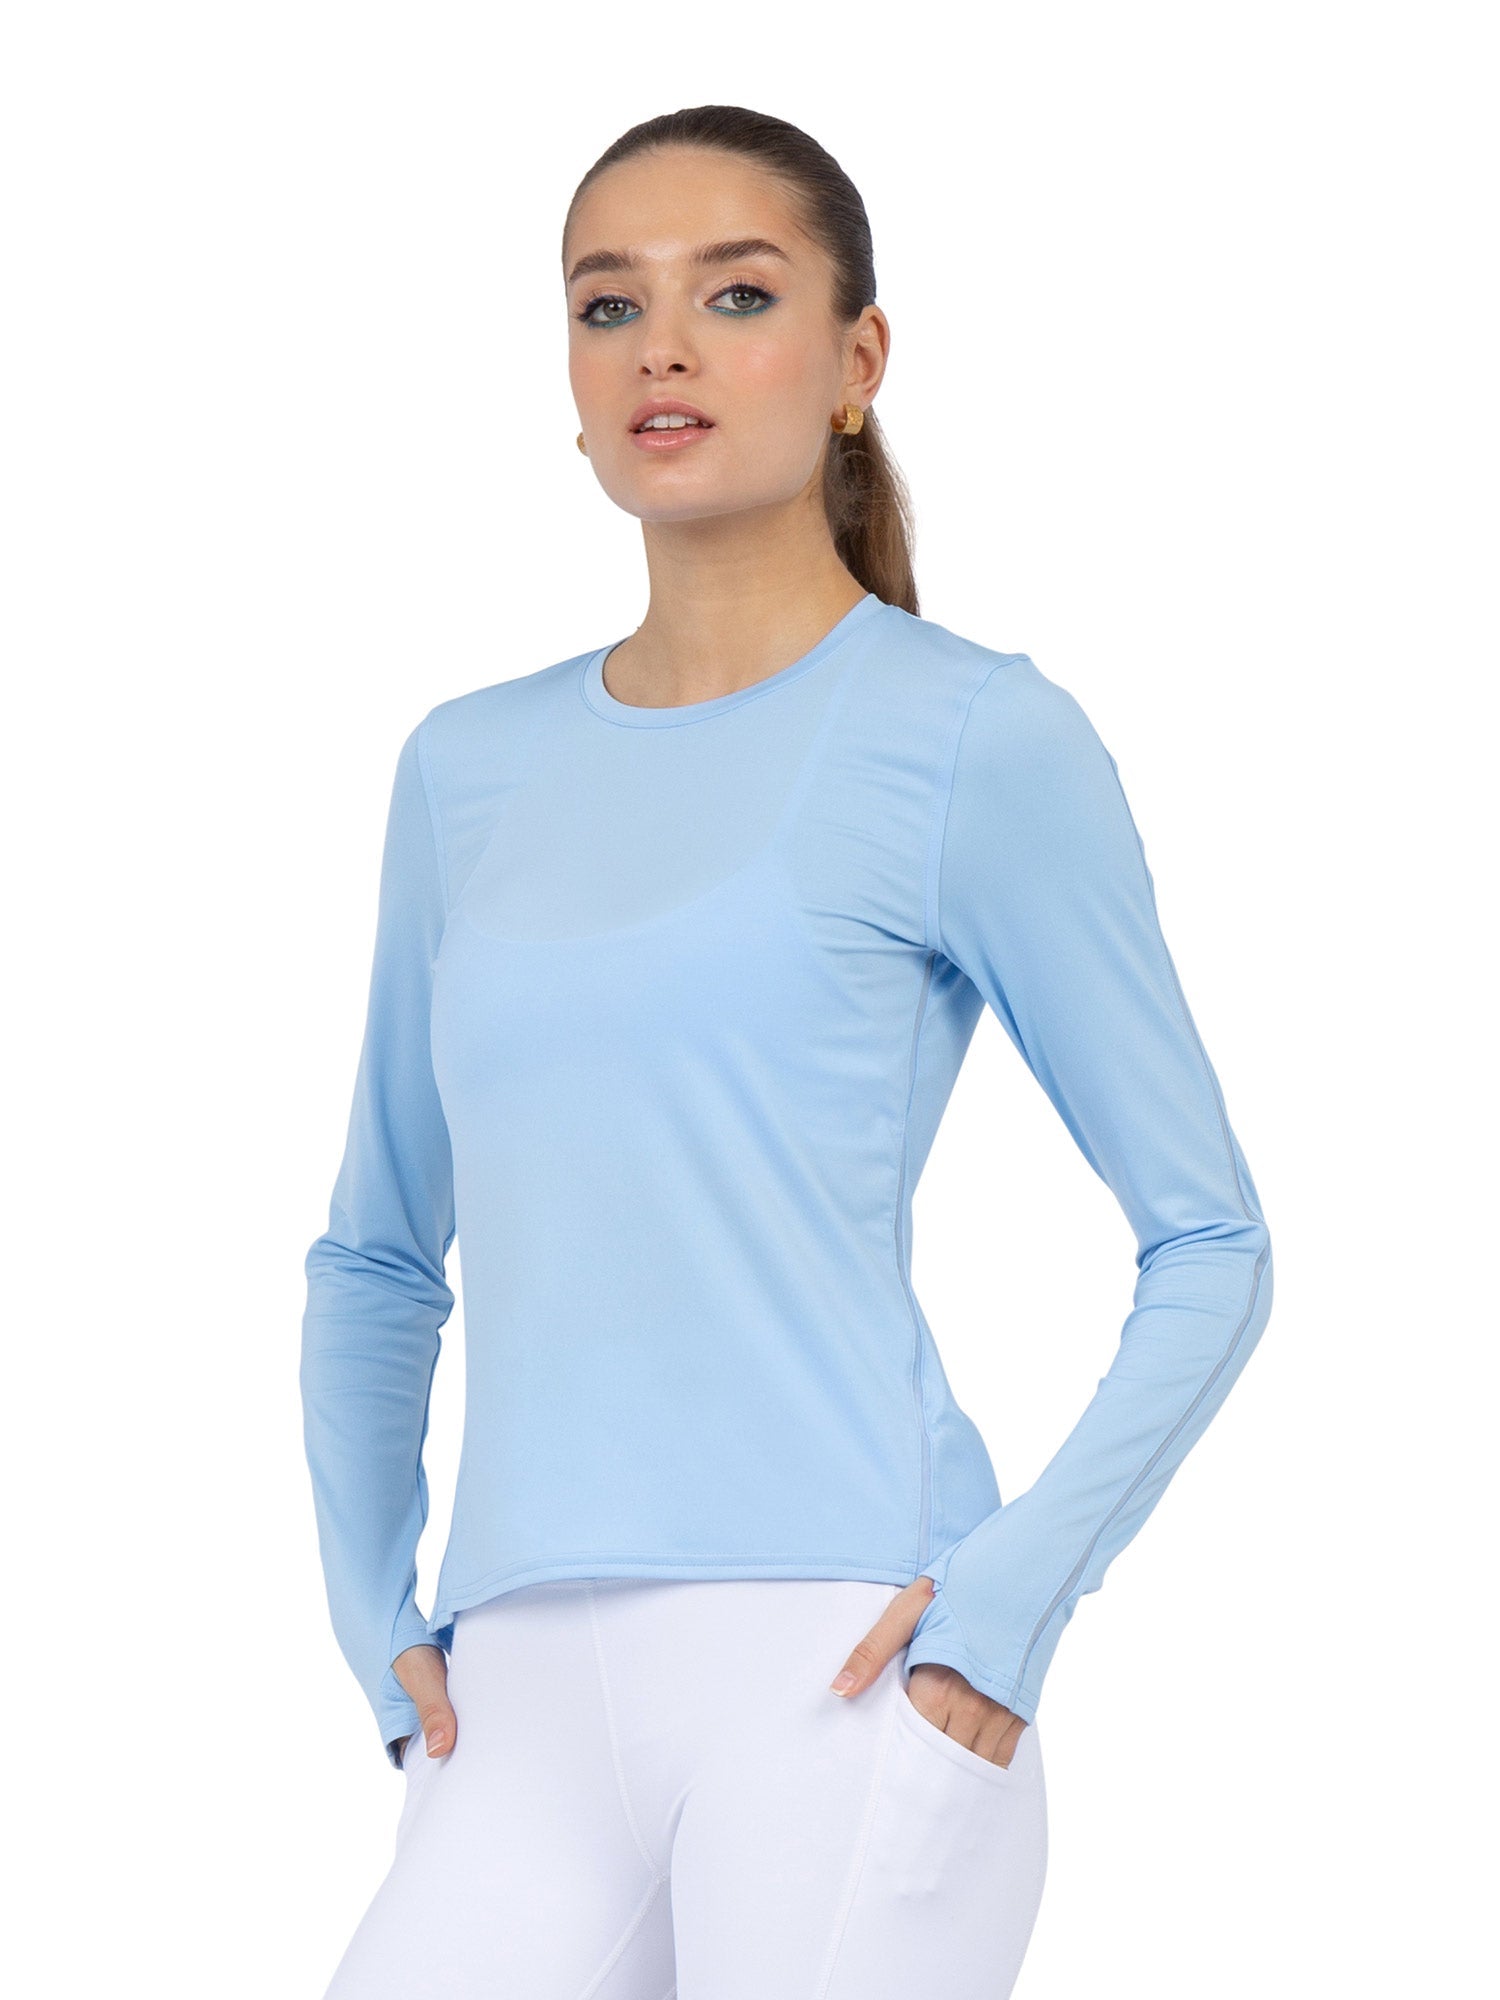 Front view of model wearing the Classic long sleeve crew neck in bluebell by inPhorm NYC with her hand in her pocket